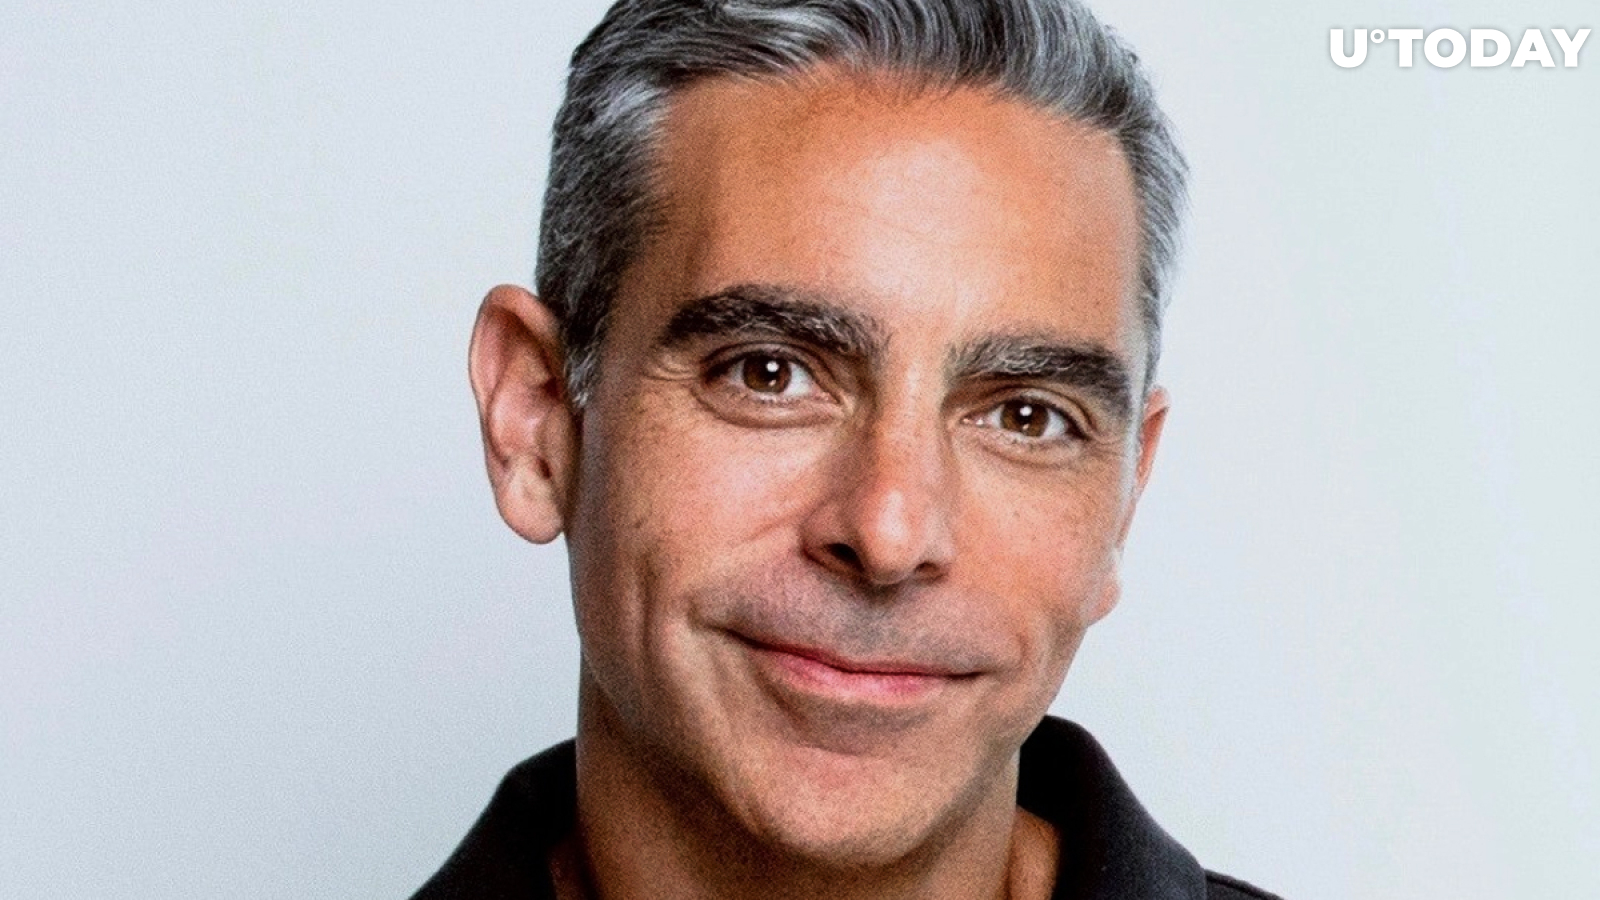 Many Banks Now Pursuing Bitcoin and Stablecoin Support: Facebook’s David Marcus